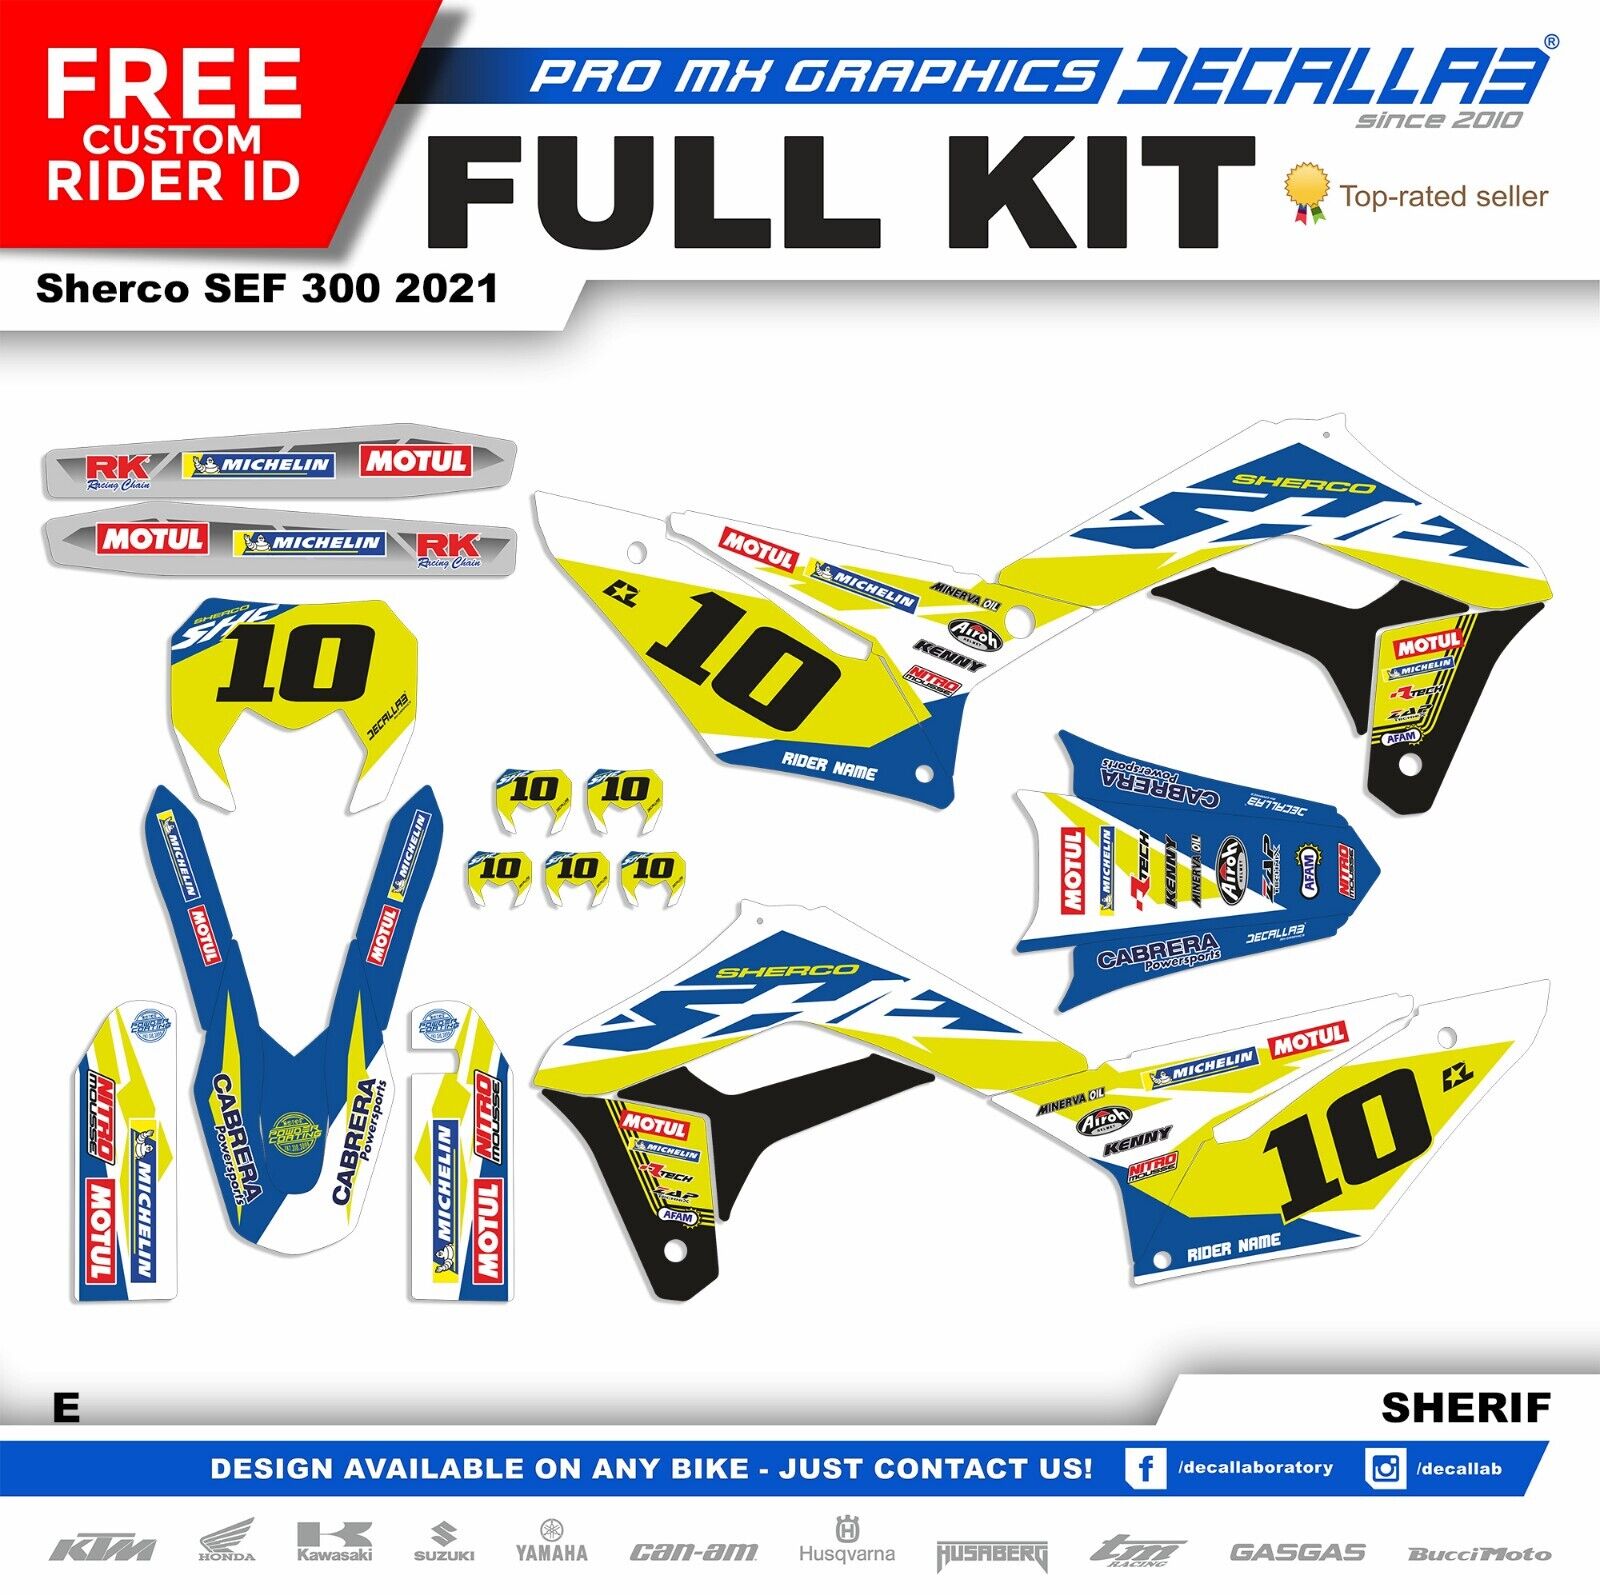 Sherco  SEF 300 2021 Super durable MX Graphics Decals Stickers Decallab